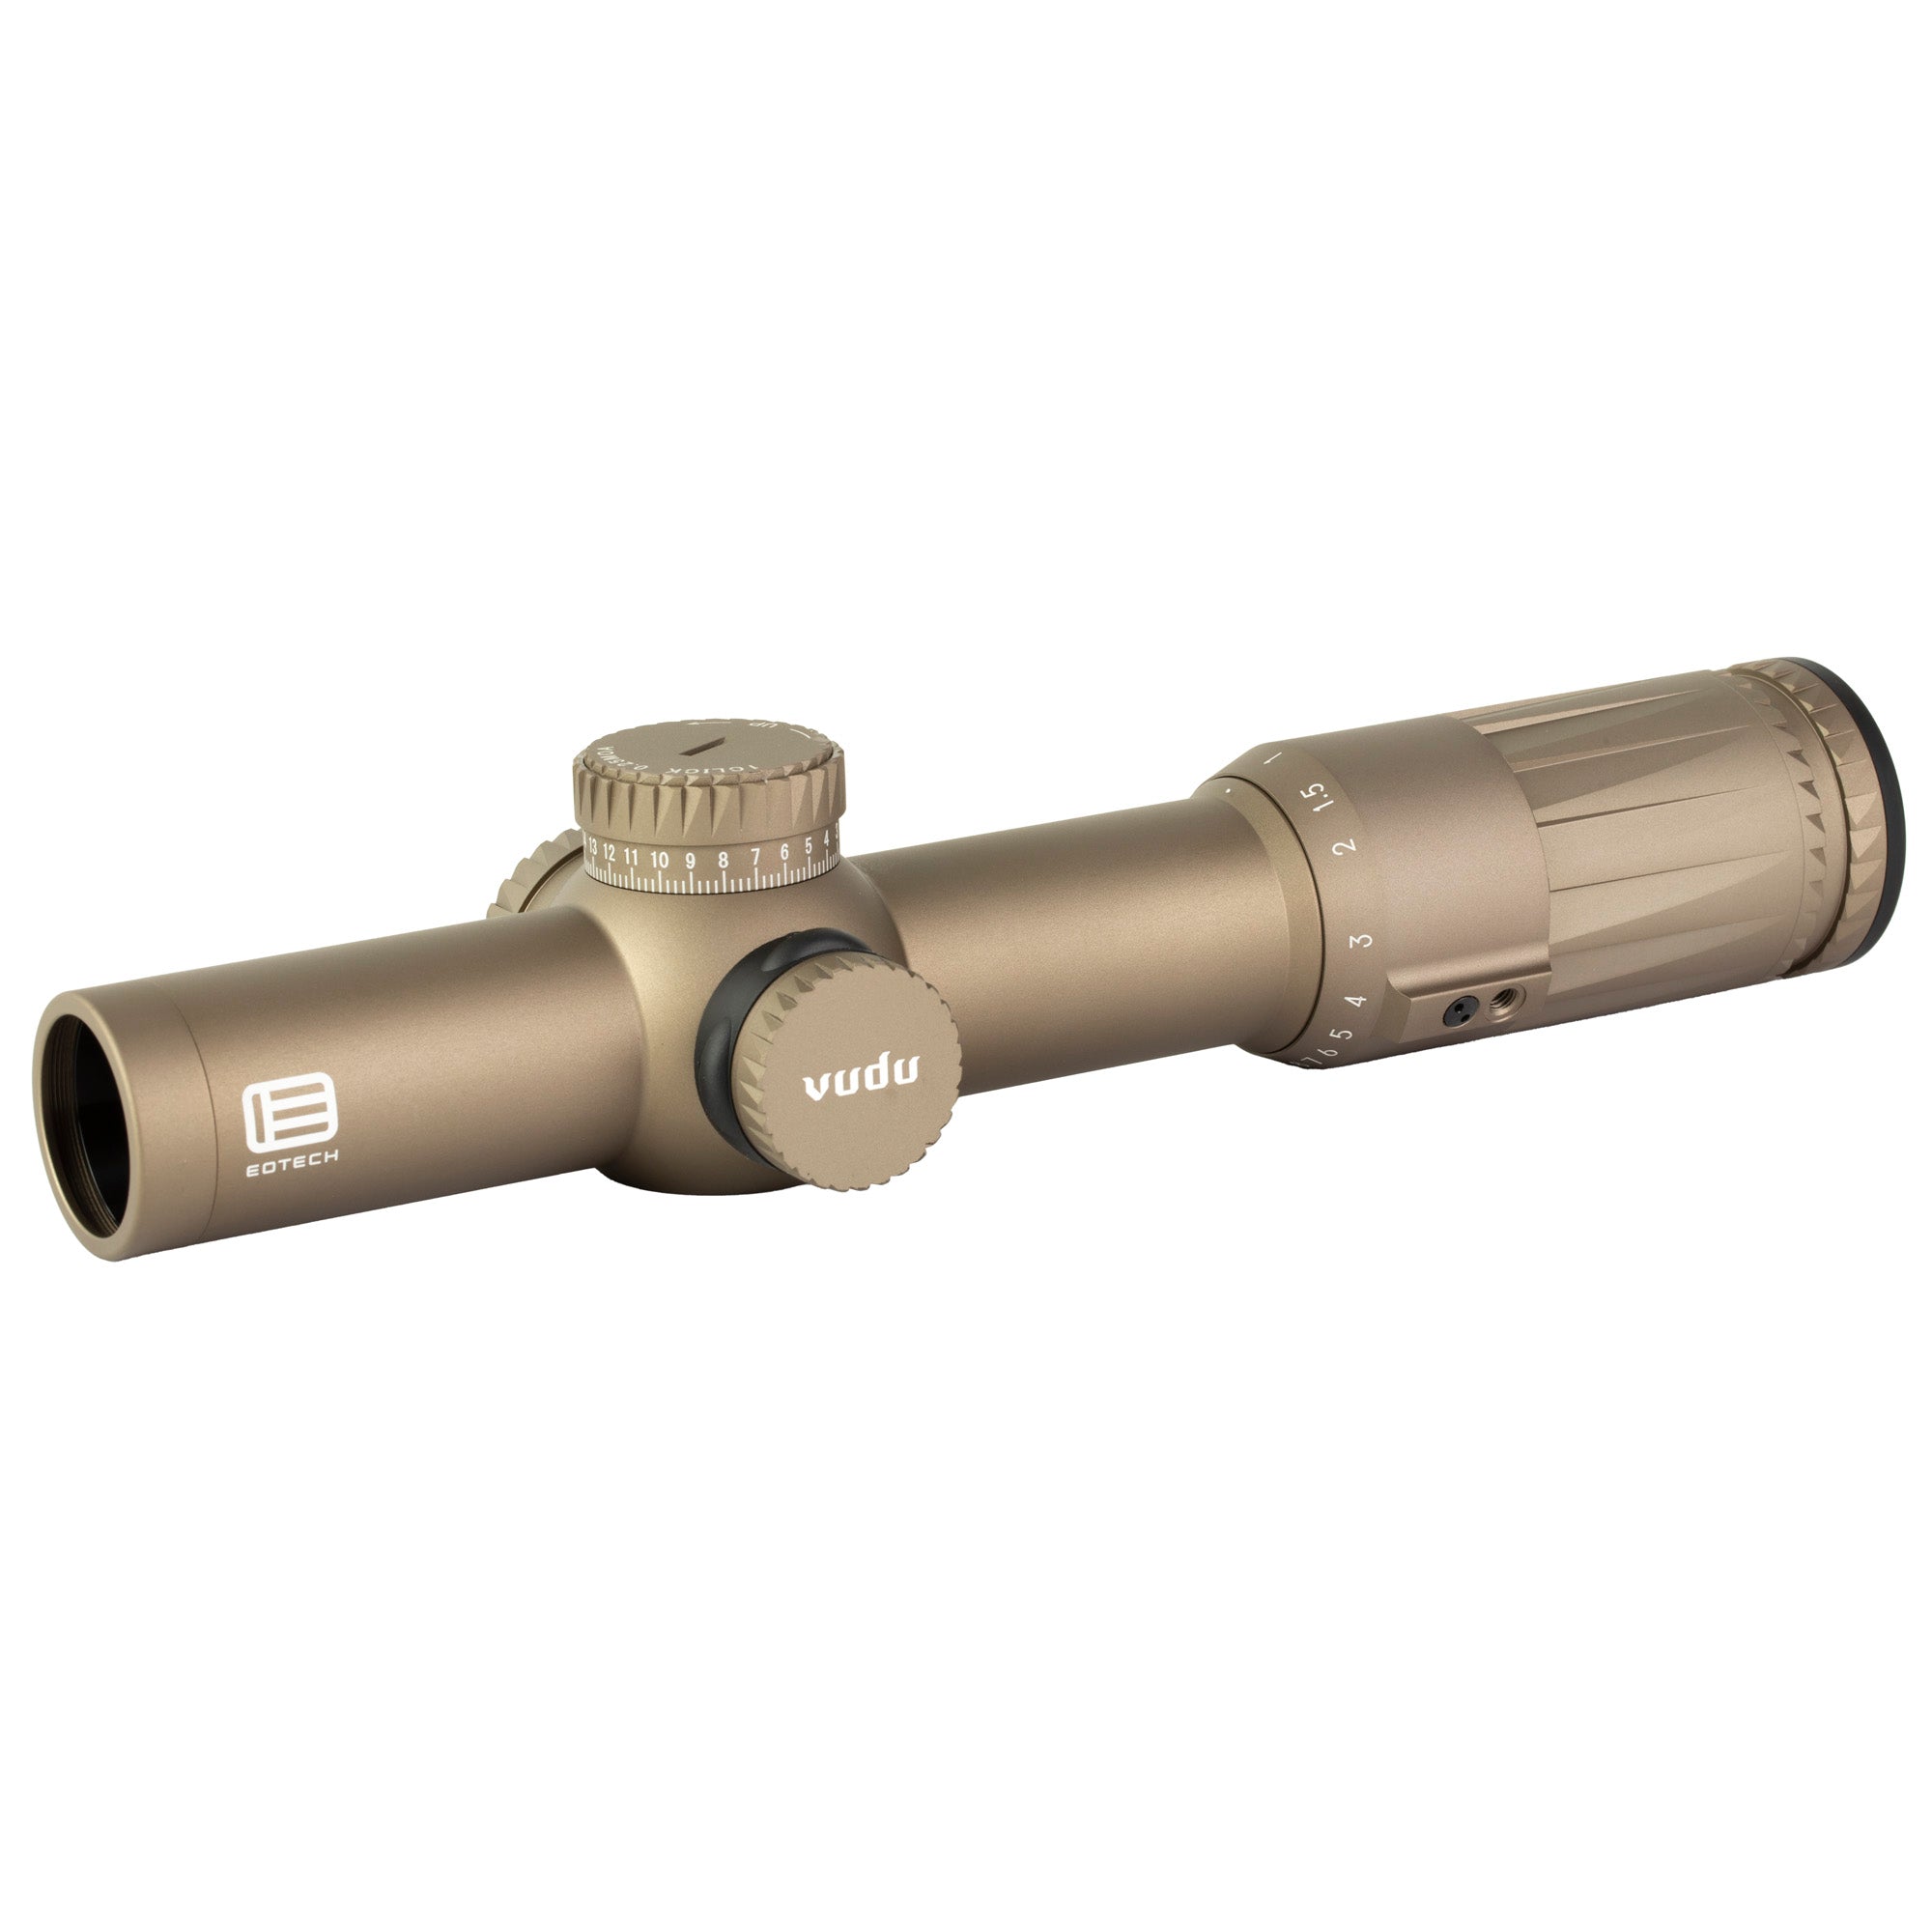 EOTech Vudu 1-10x28 Rifle Scope in Tan with SR-4 Illuminated MOA Reticle, first focal plane for precise long-range accuracy